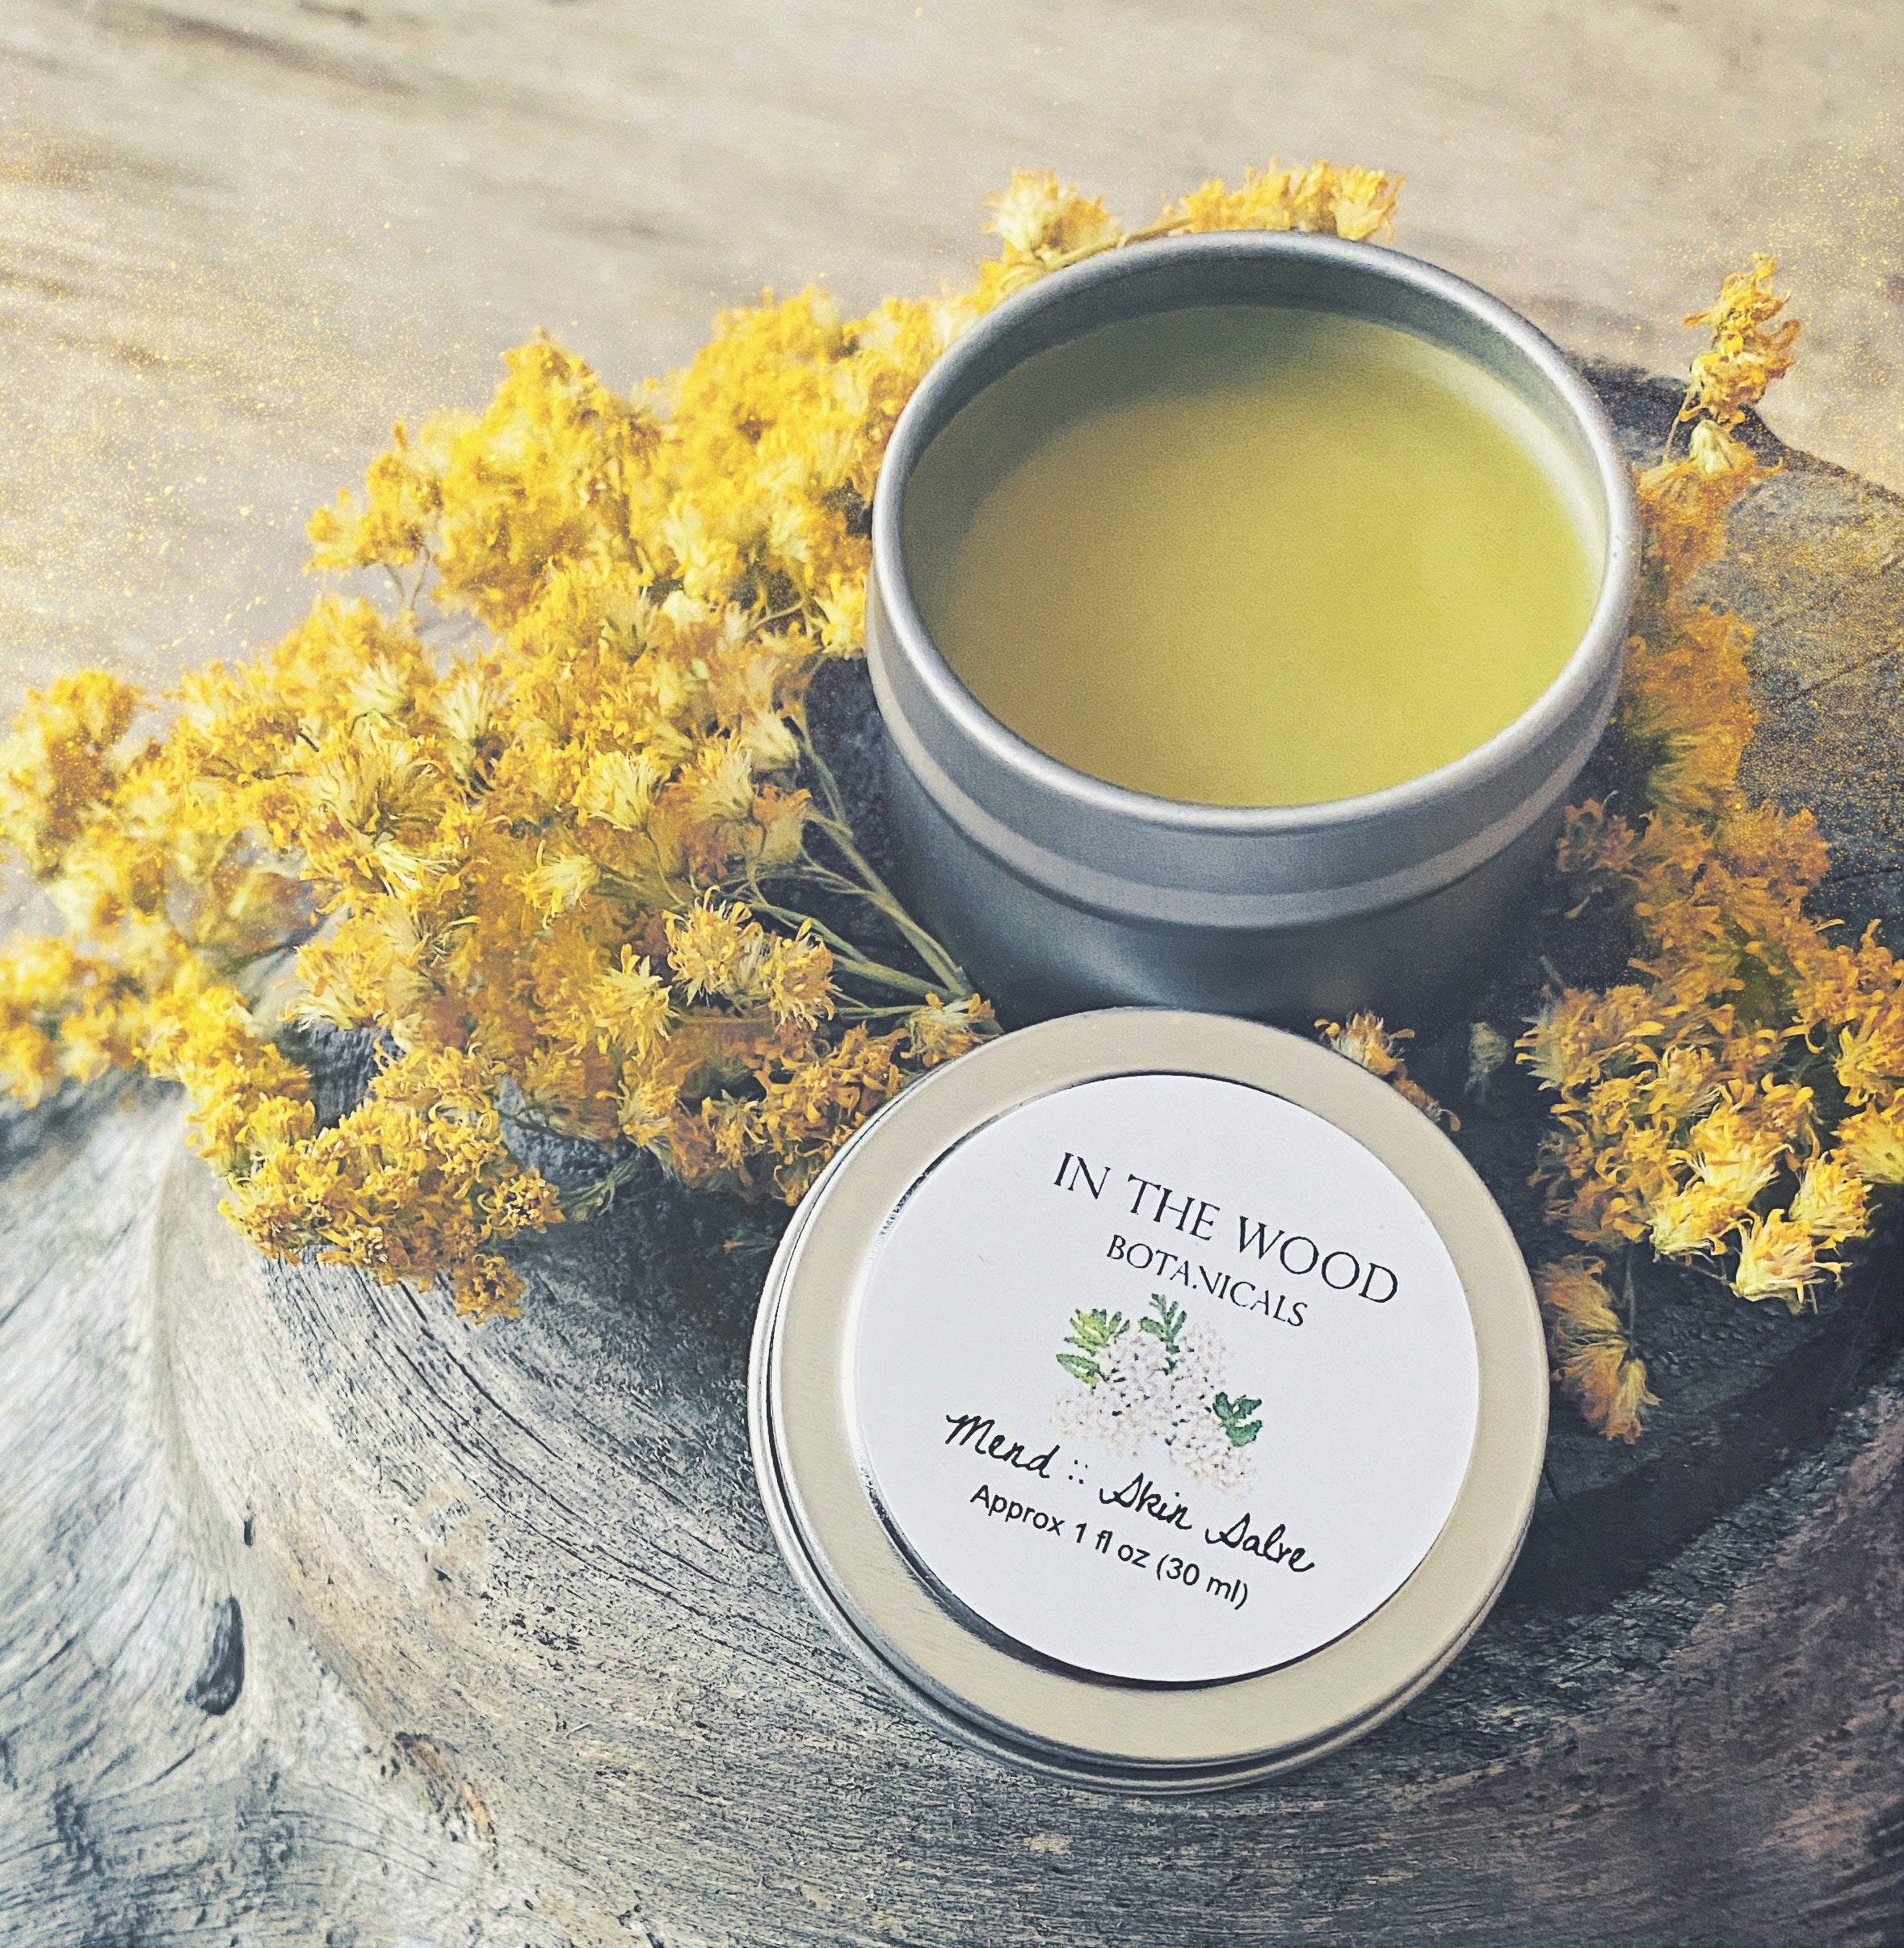 Mend :: An All-Purpose Herbal Salve for Skin